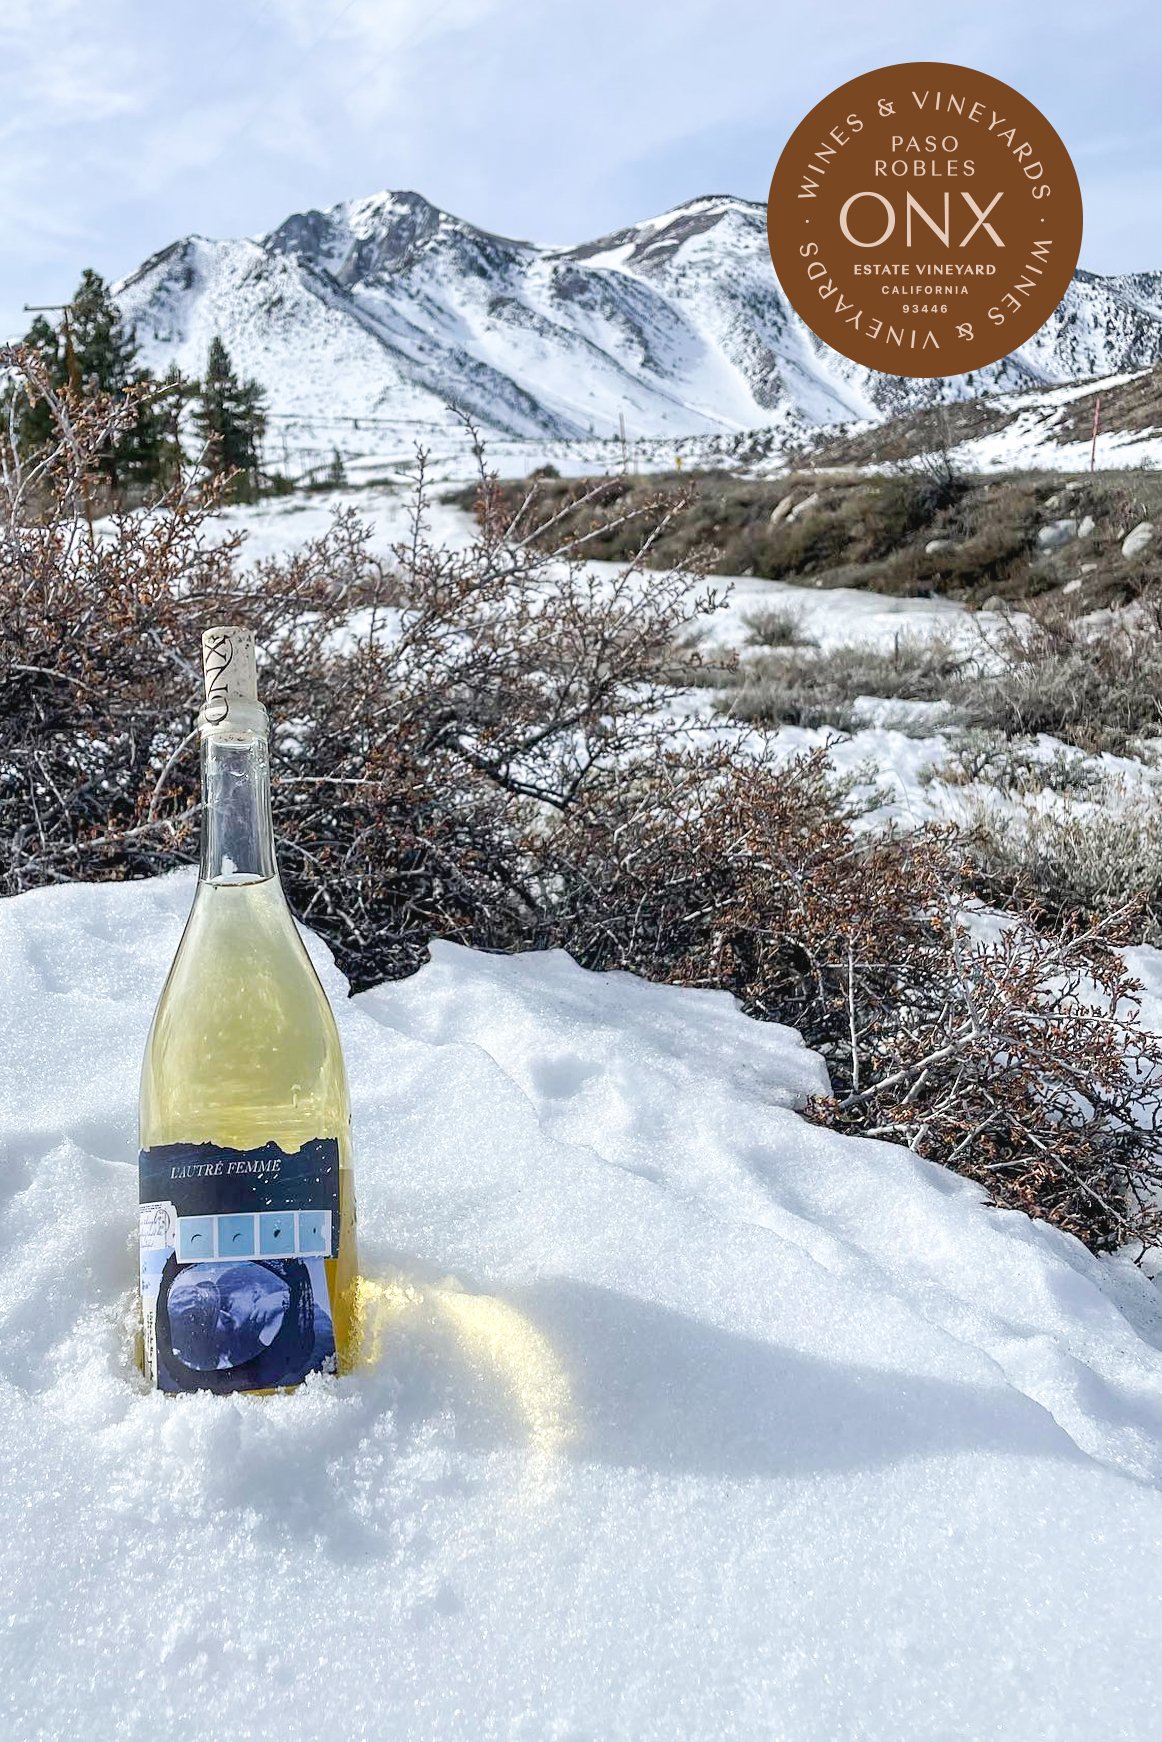 A white wine chills in the snow with mountains in the background